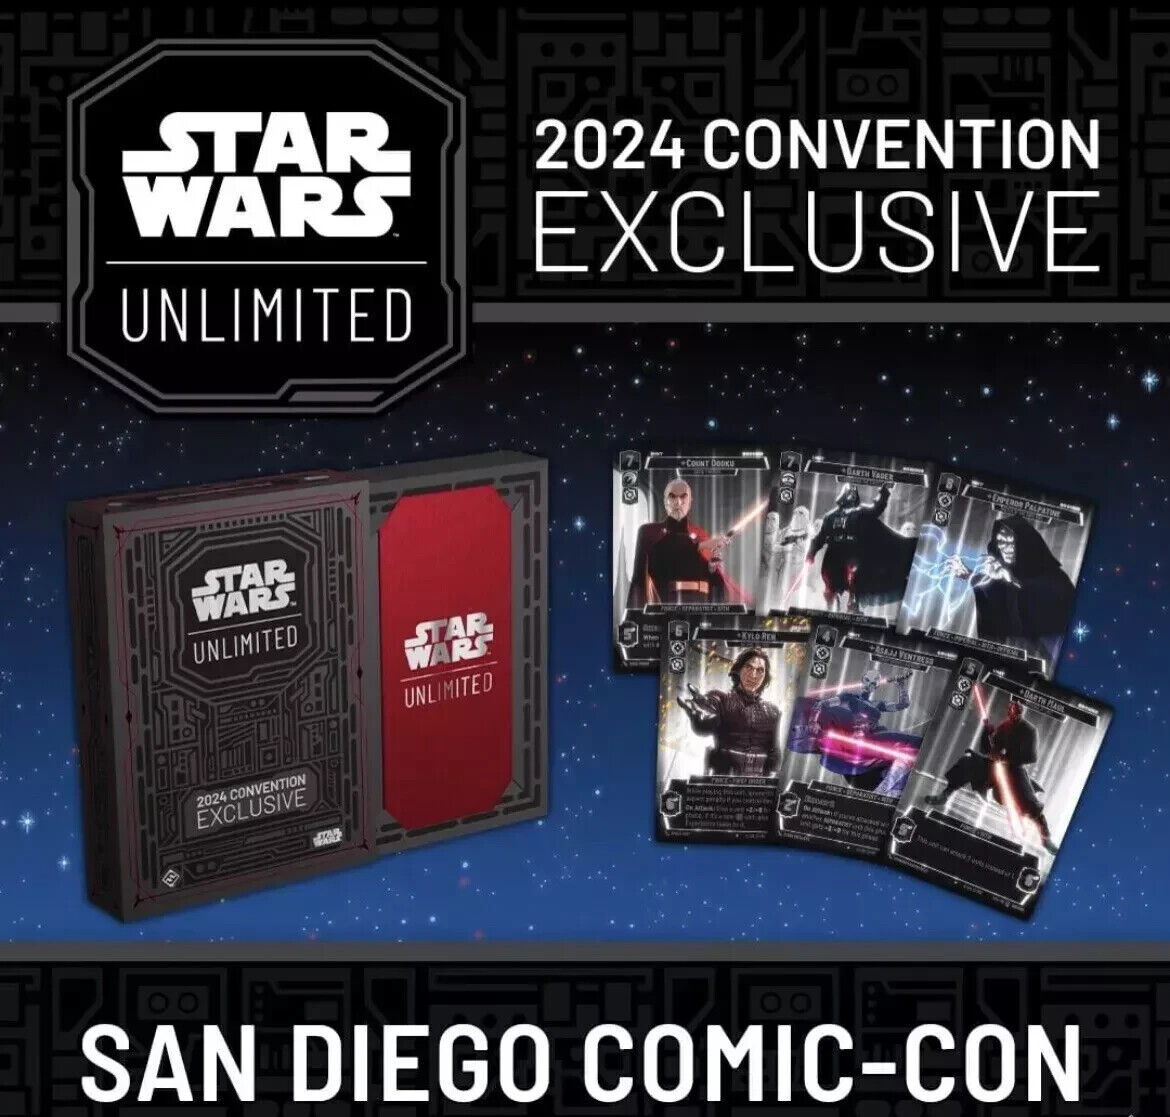 STAR WARS UNLIMITED SDCC 2024 Convention Exclusive Limited Edition Preview Night